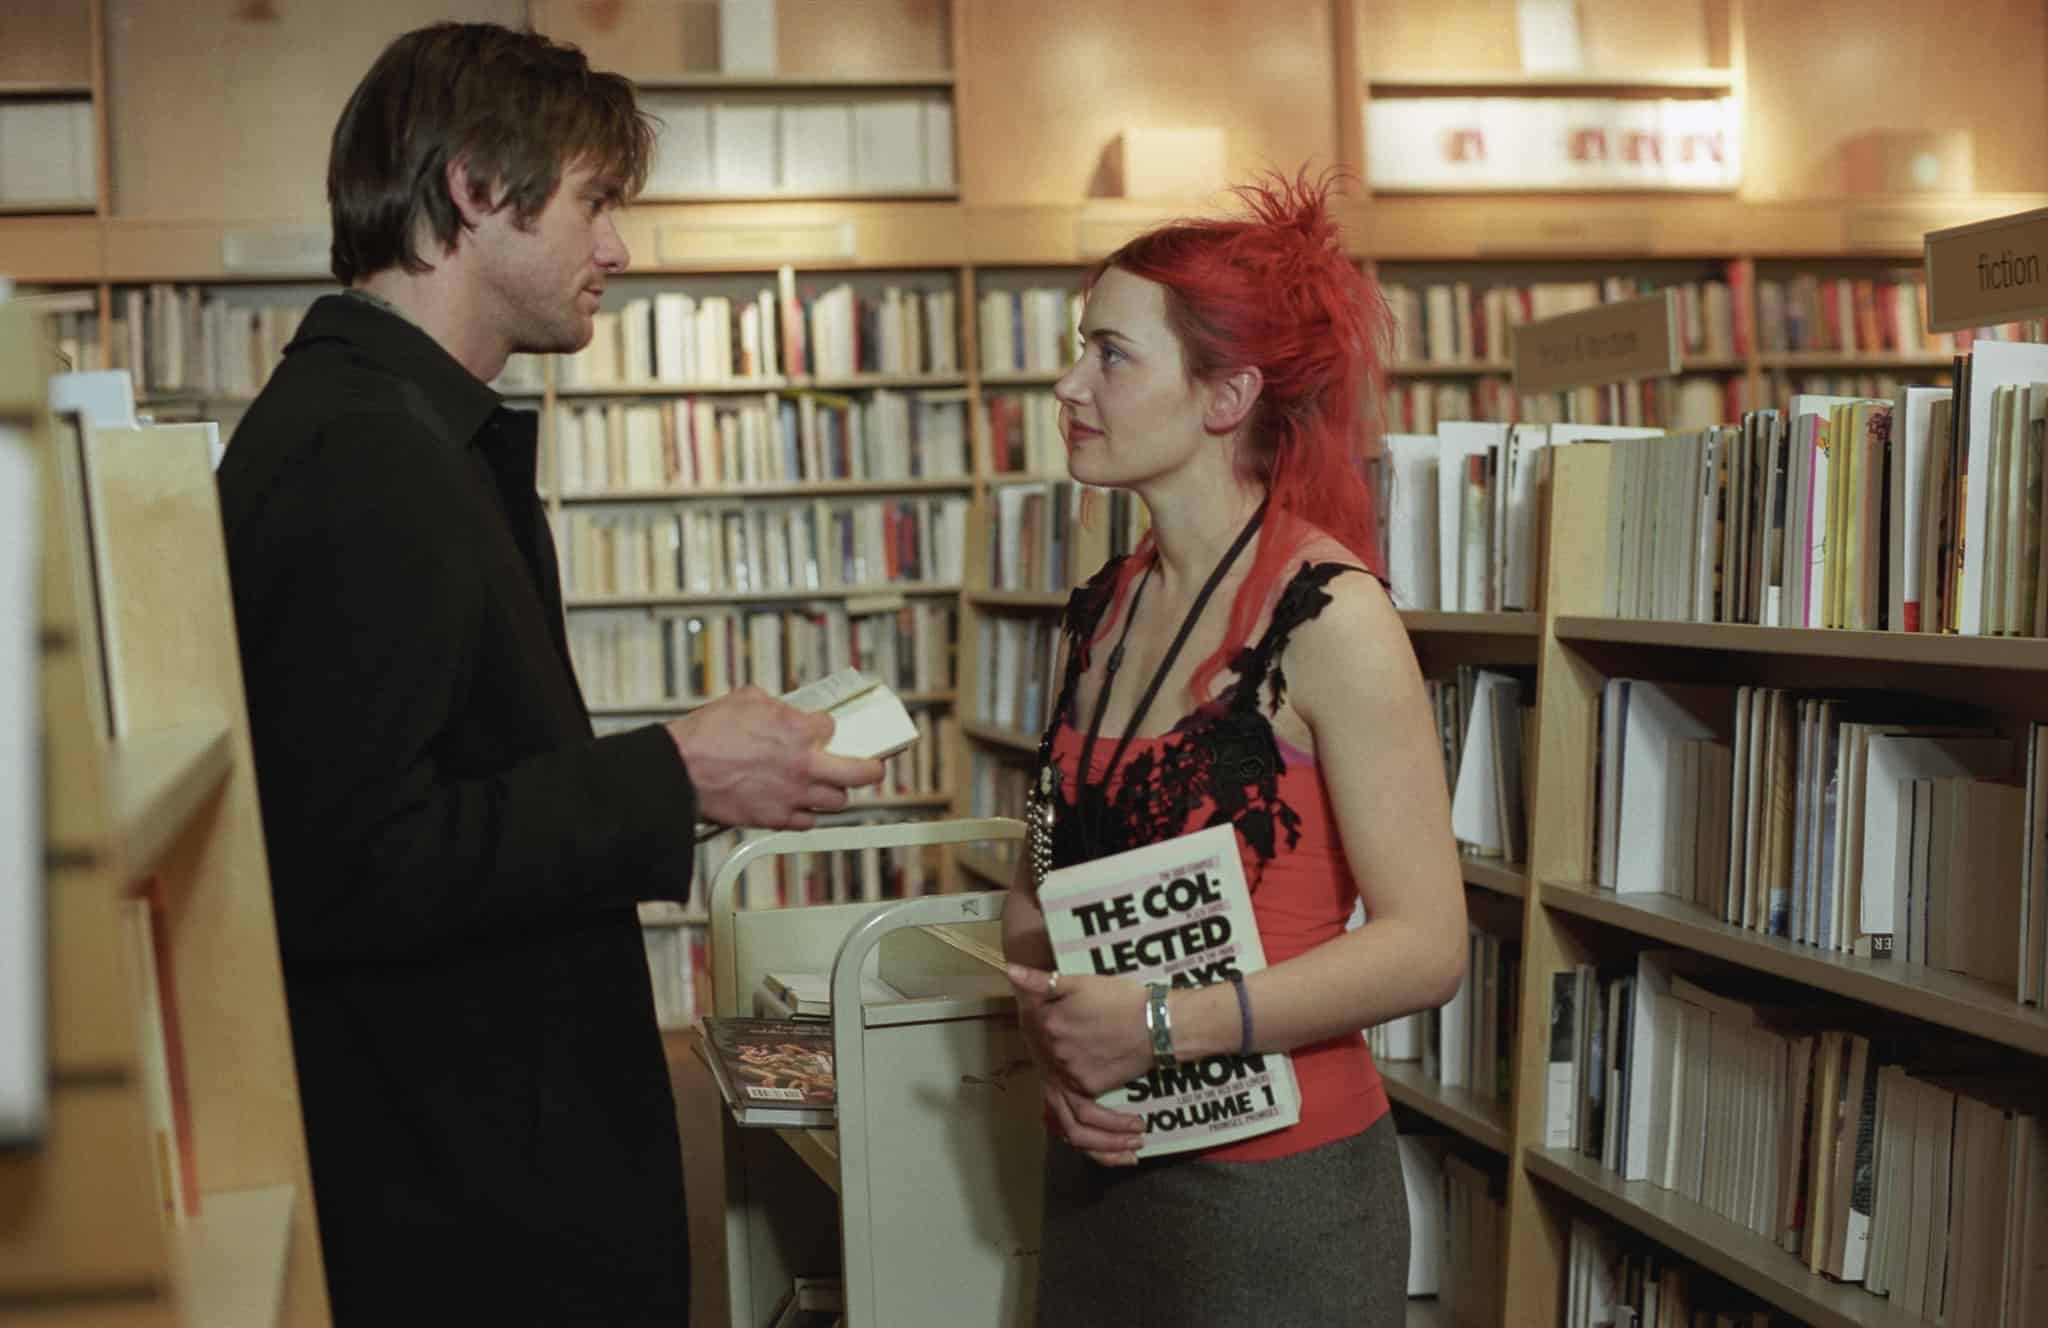 A man talks to a punk woman in a bookstore in this image from Anonymous Content.